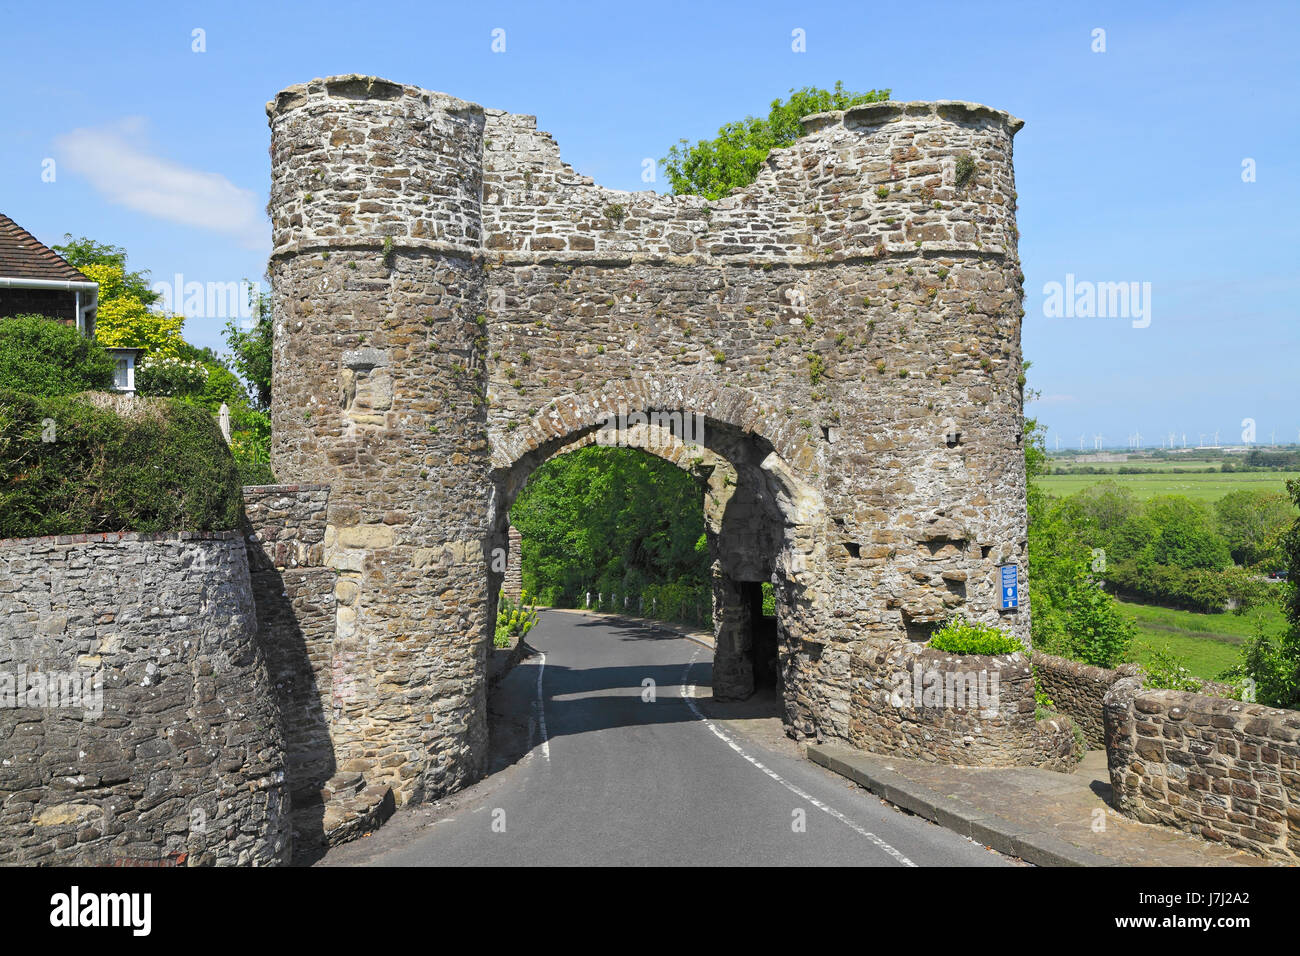 The Strand Gate in Winchelsea, one of the three remaining medieval gateways defending the hill top town, East Sussex, England, UK Stock Photo